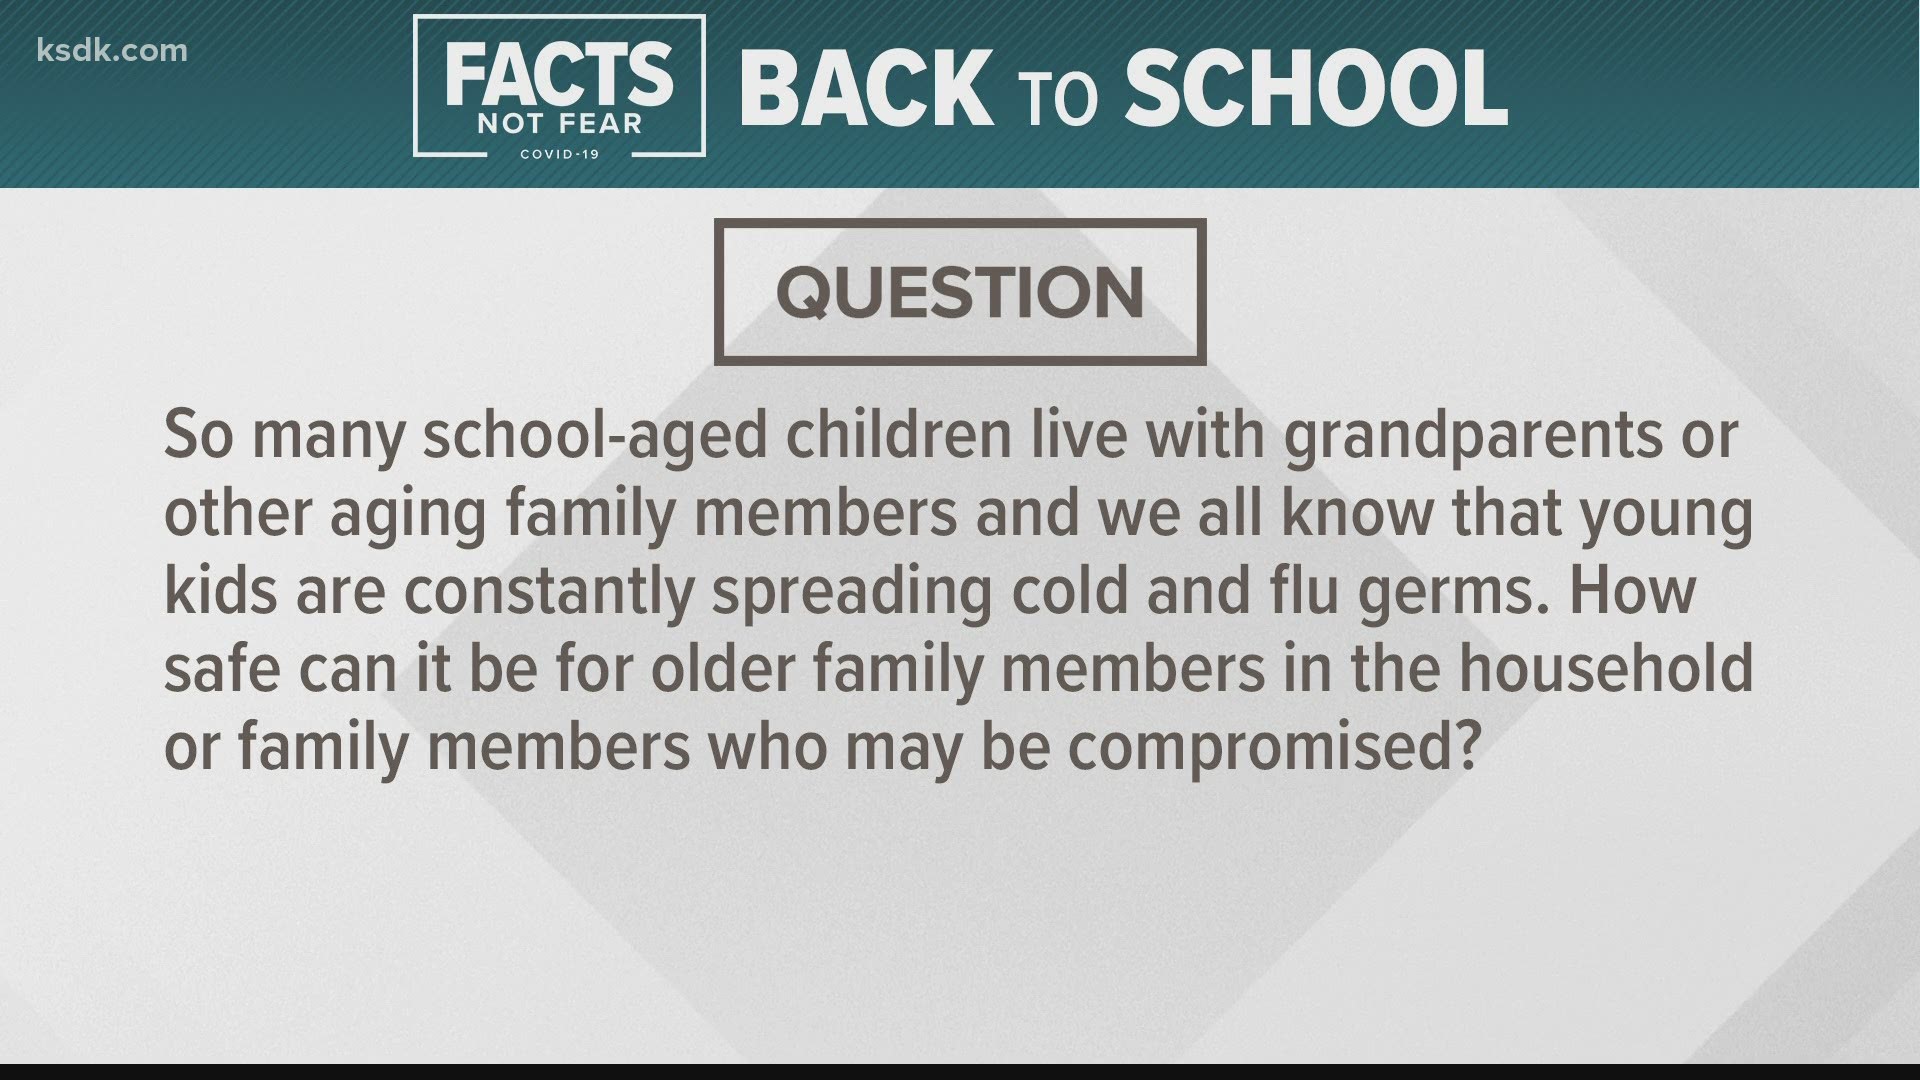 A viewer reached out asking how to keep older family members safe as kids head back to in-classroom learning.